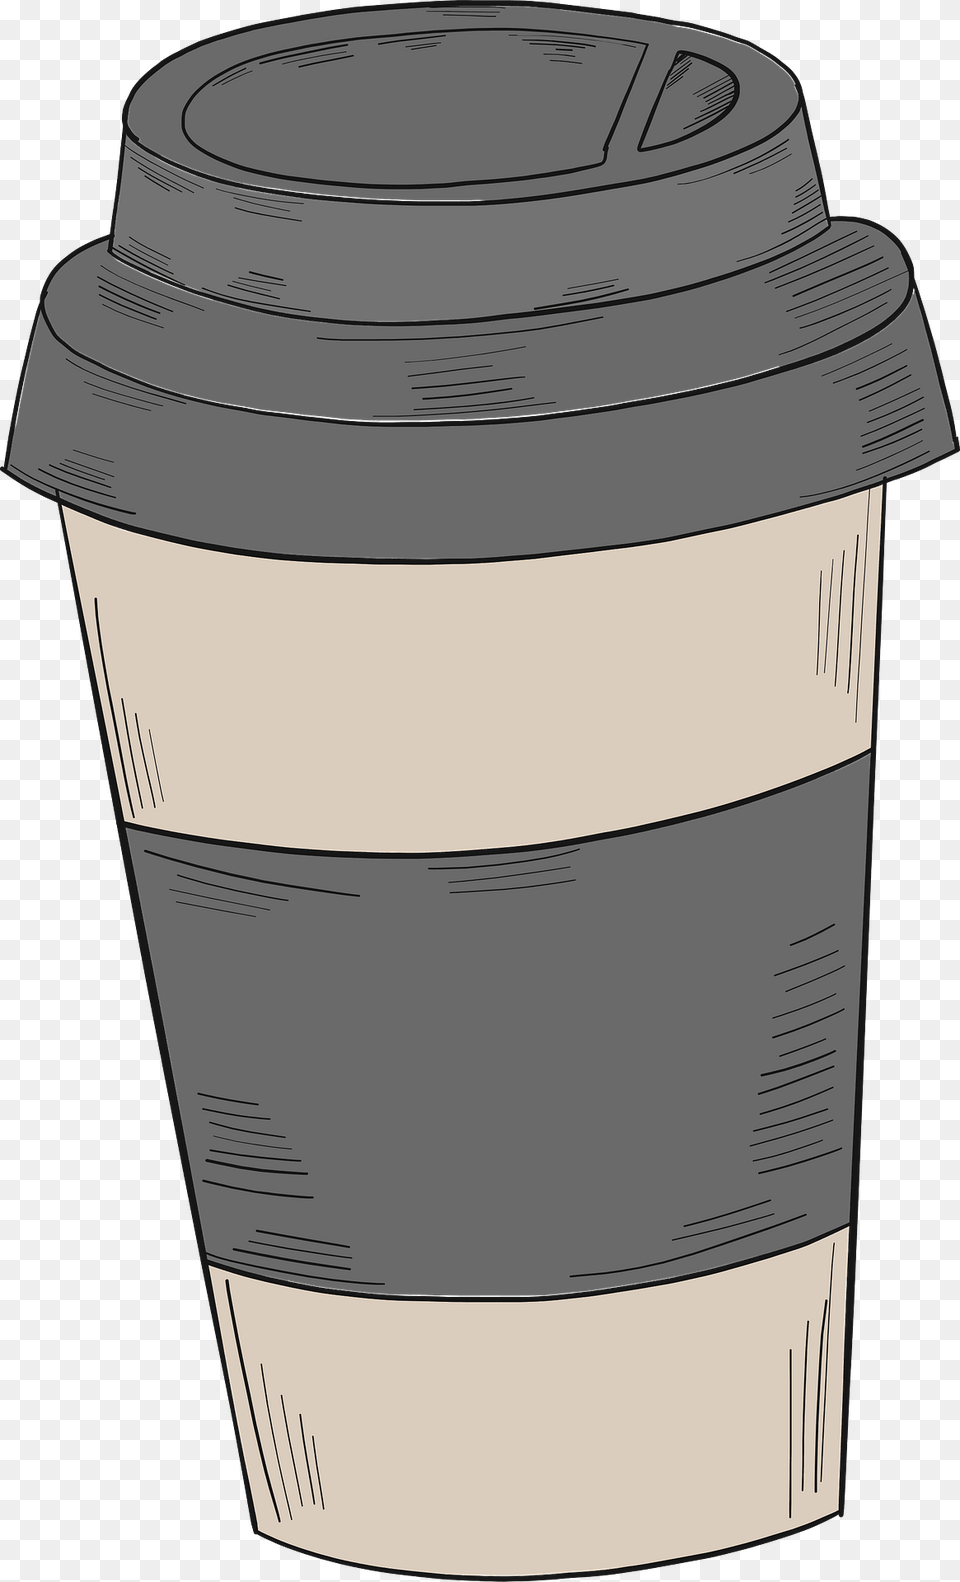 Cup Of Coffee Clipart, Jar, Bottle, Shaker, Hot Tub Png